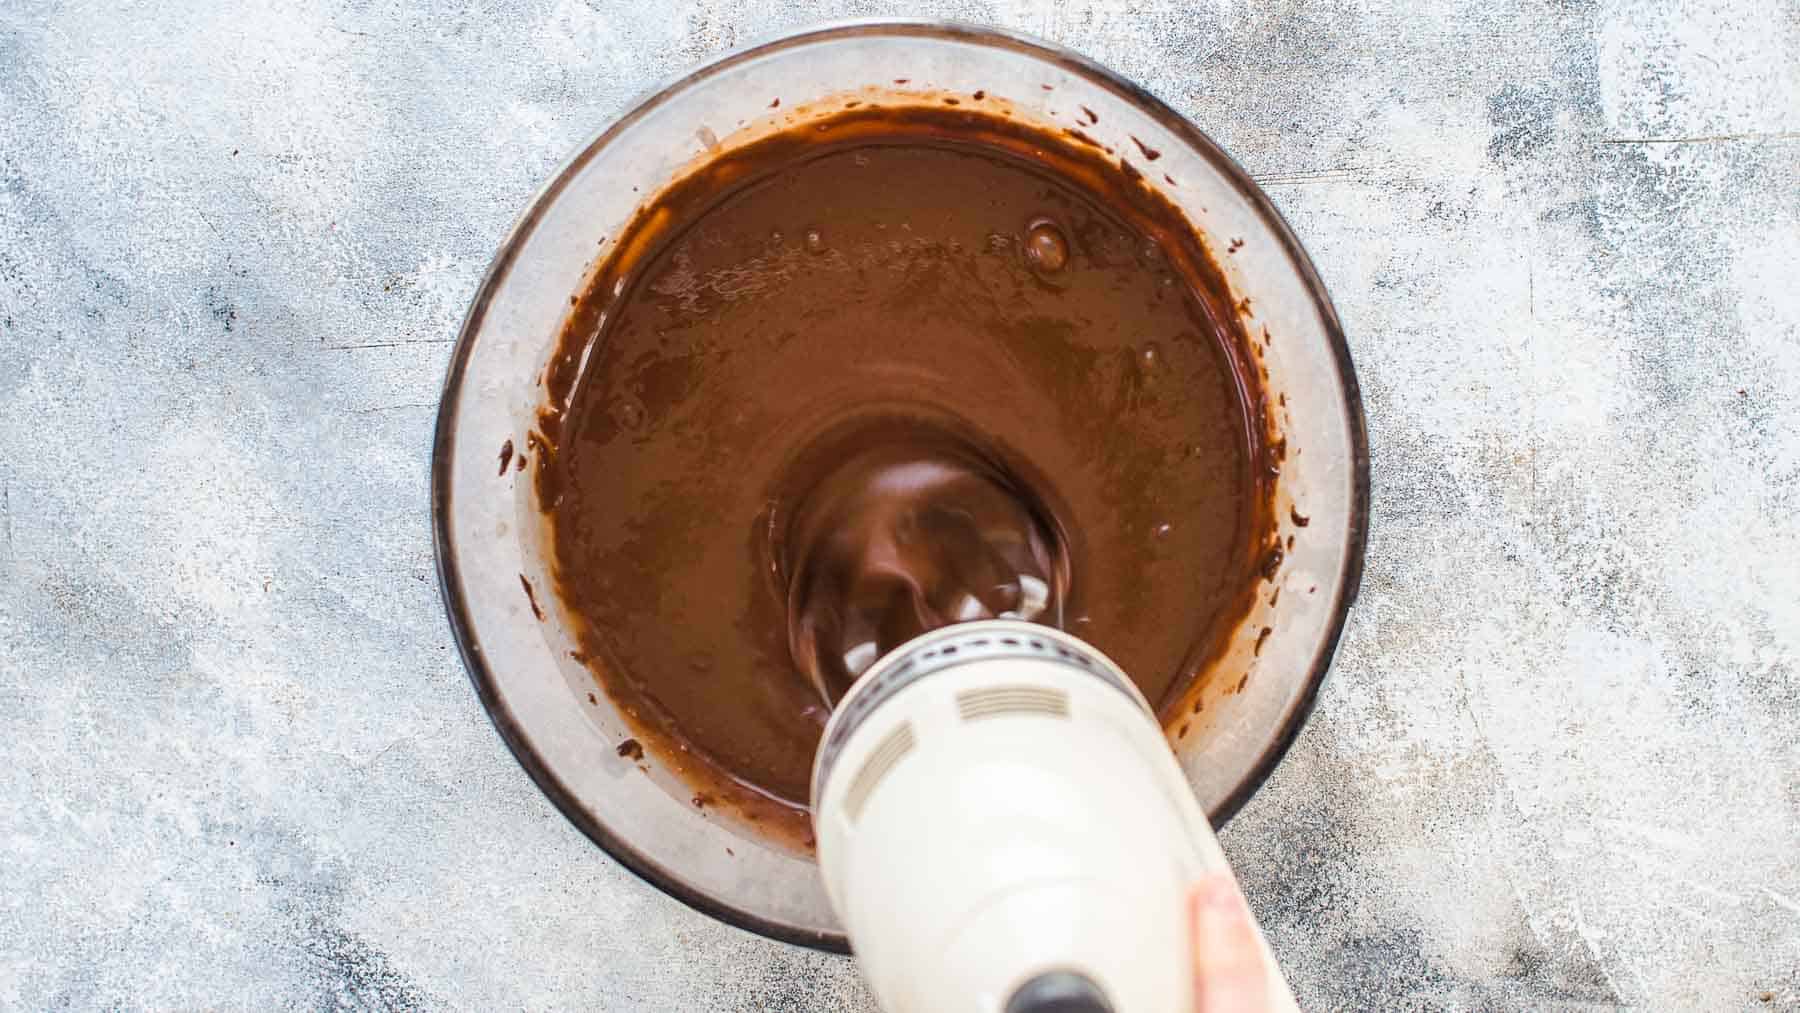 Mixing chocolate cake ingredients in a large mixing bowl